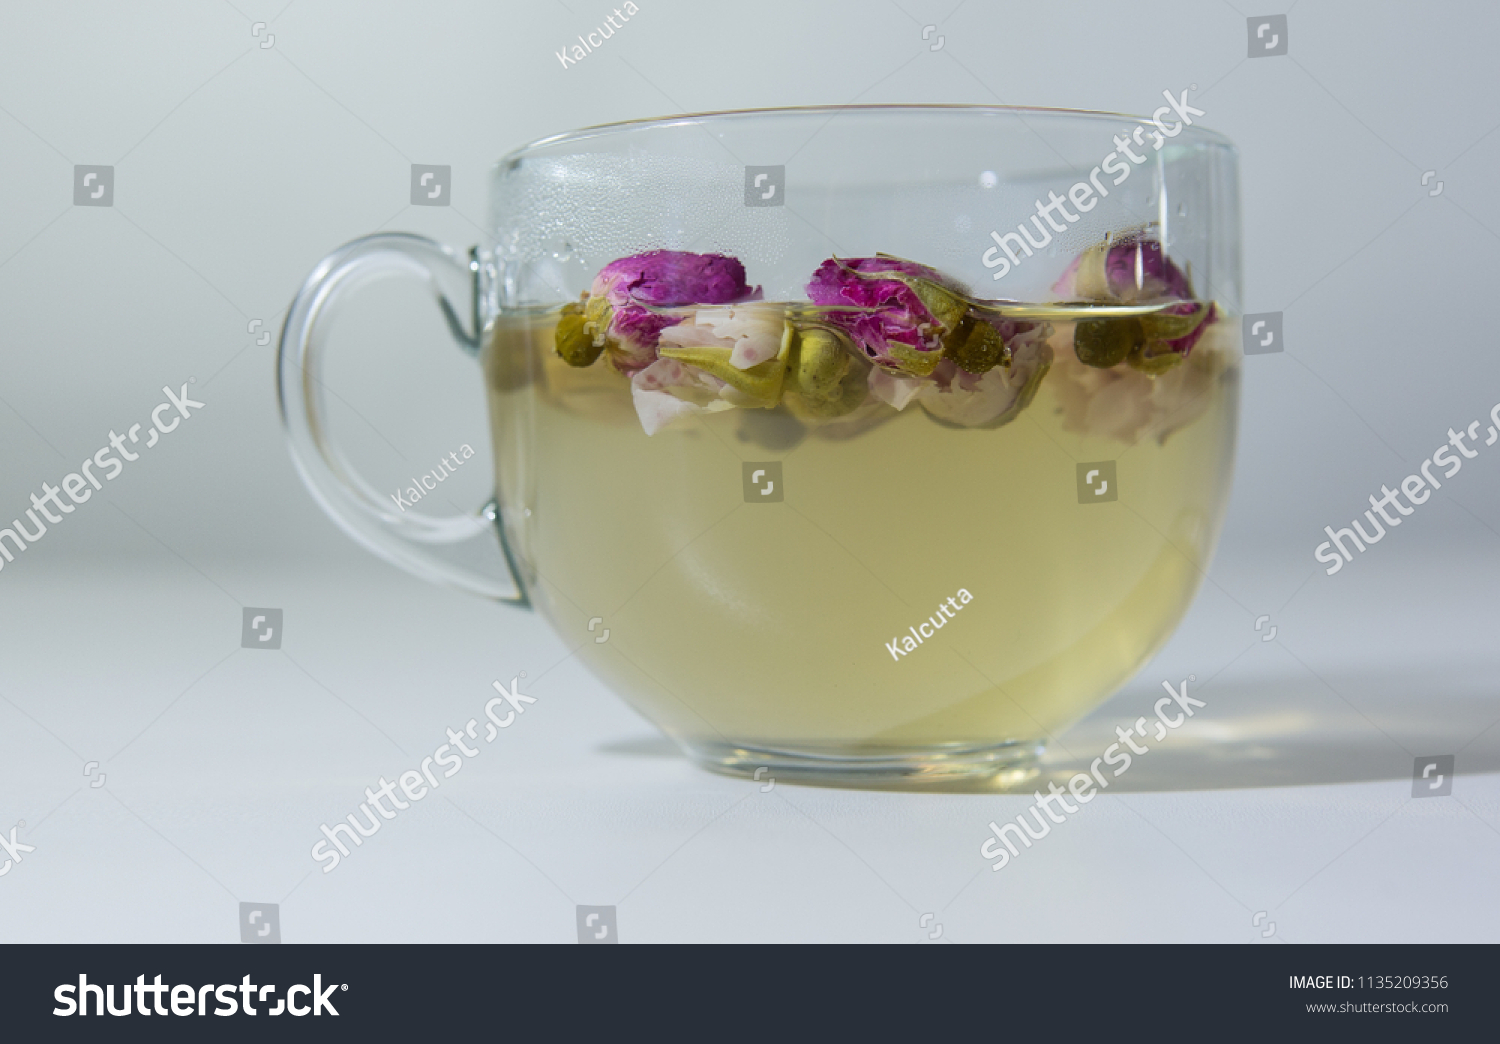 Tea EvaDia Mei Gui Hua Bao, Rose buds close-up. Flower and herbal tea, Mei Gui Hua. This category can also be called herbal infusions, or tisanes. A floral, exotic tea. Wellness and Detox.  #1135209356